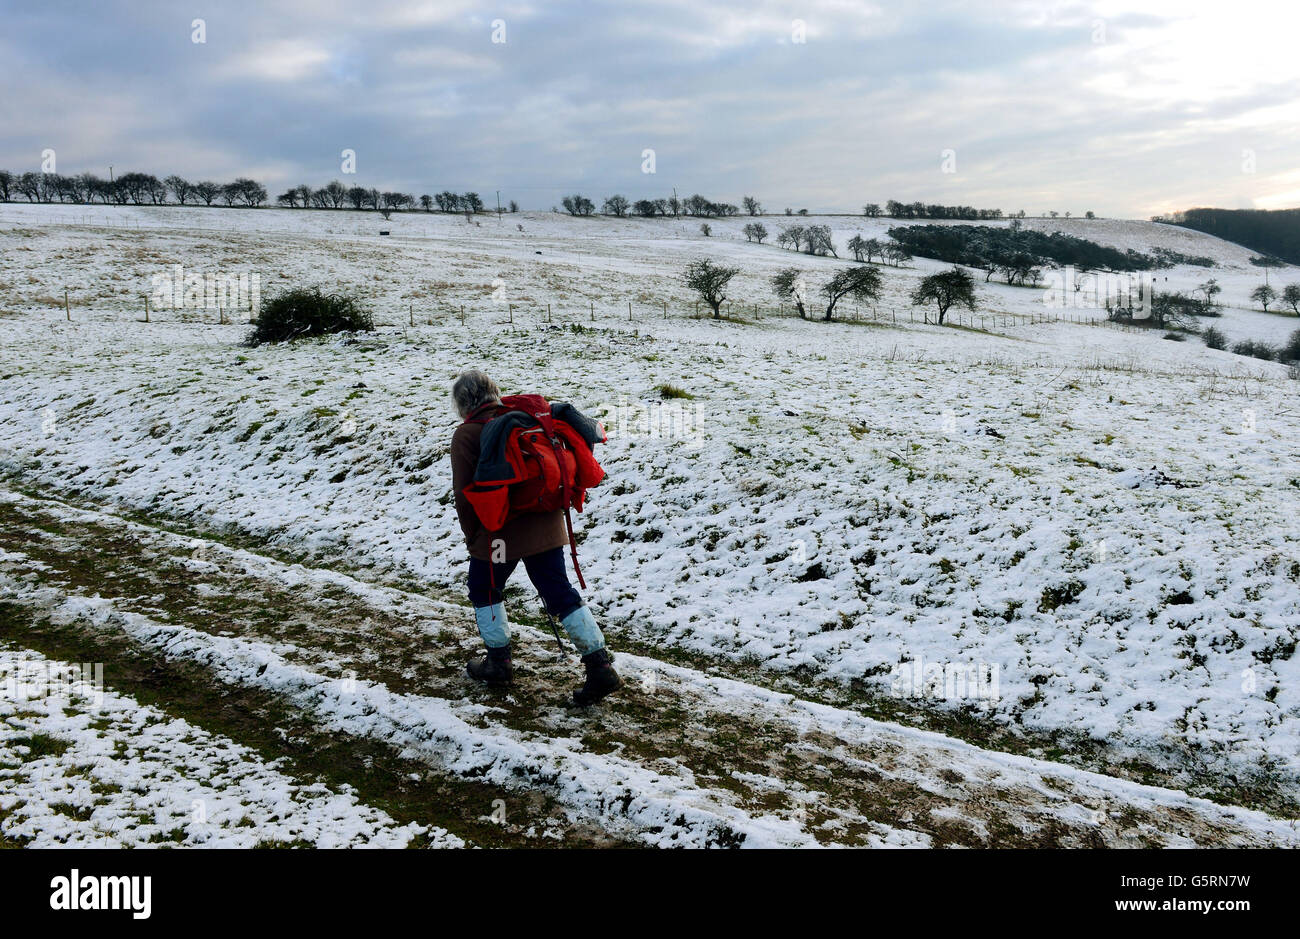 Snow on the high ground of the Yorkshire Wolds at Millington Pastures, near Pocklington, gives a walker a taste of the winter weather and snow that is forecast to effect many areas of the UK in coming days. Stock Photo